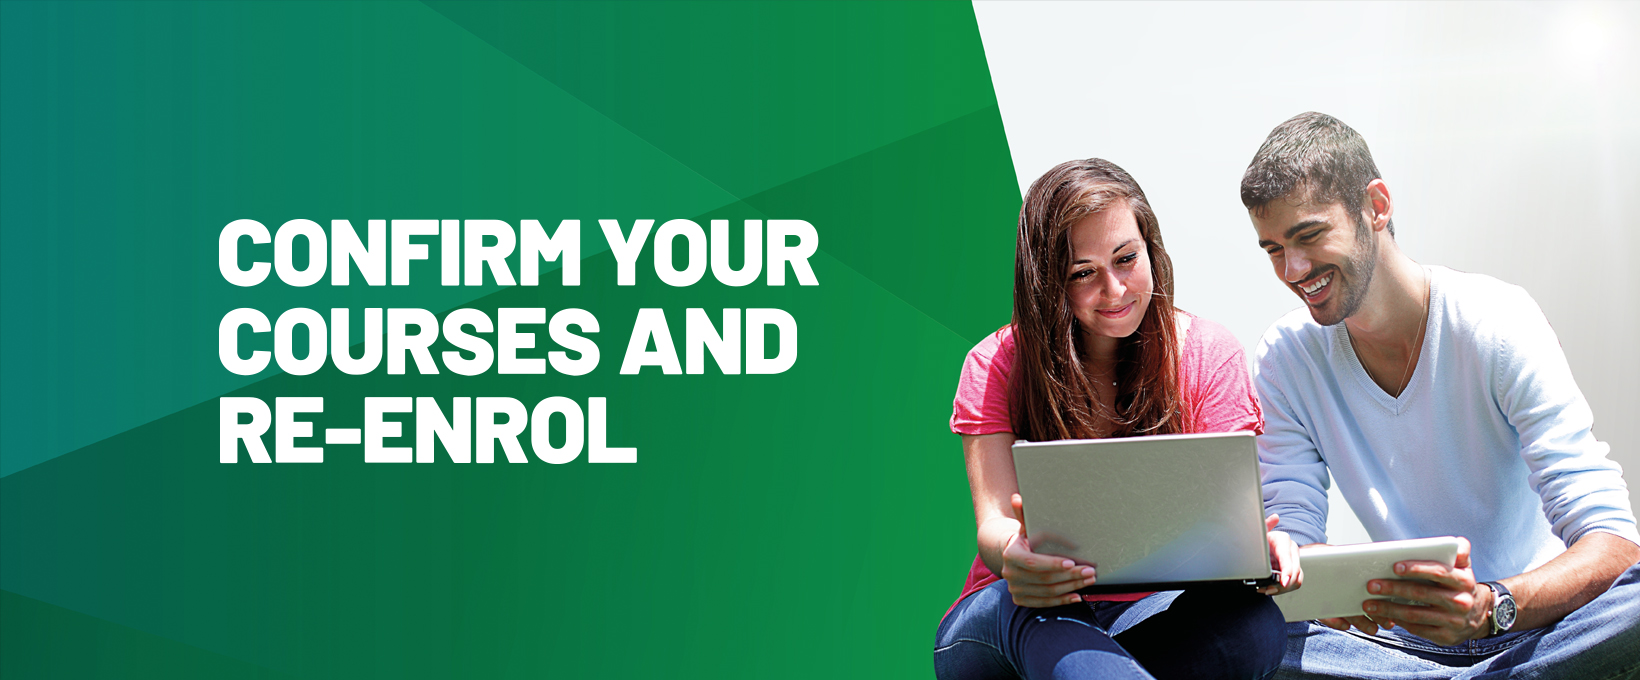 Confirm your next courses and re-enrol